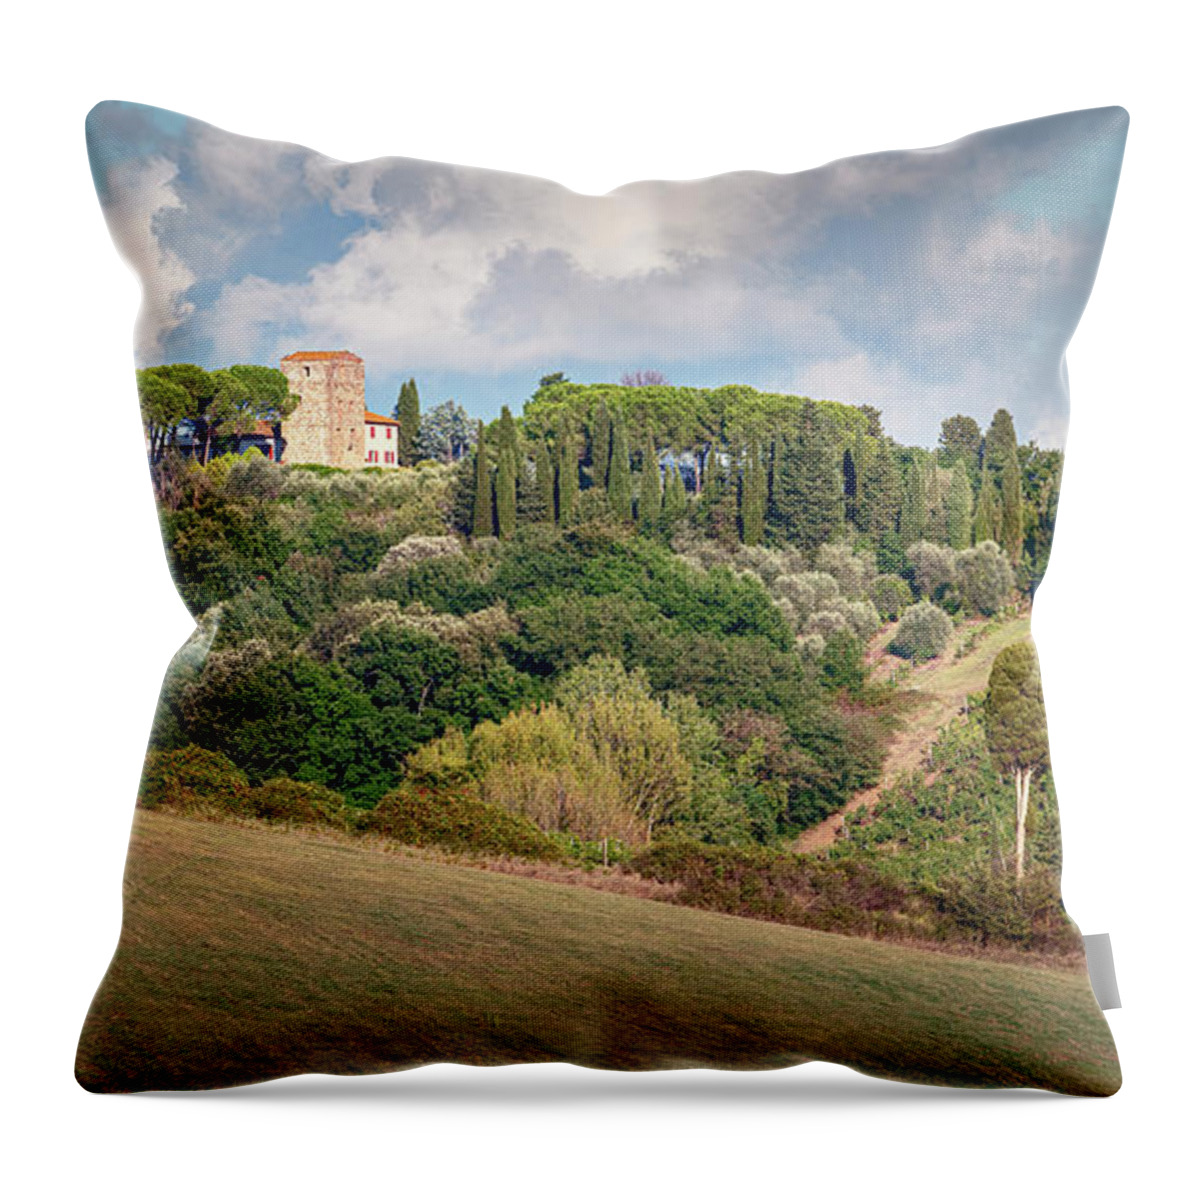 Tuscany Throw Pillow featuring the photograph Vineyard Morning Tuscany Italy by Joan Carroll